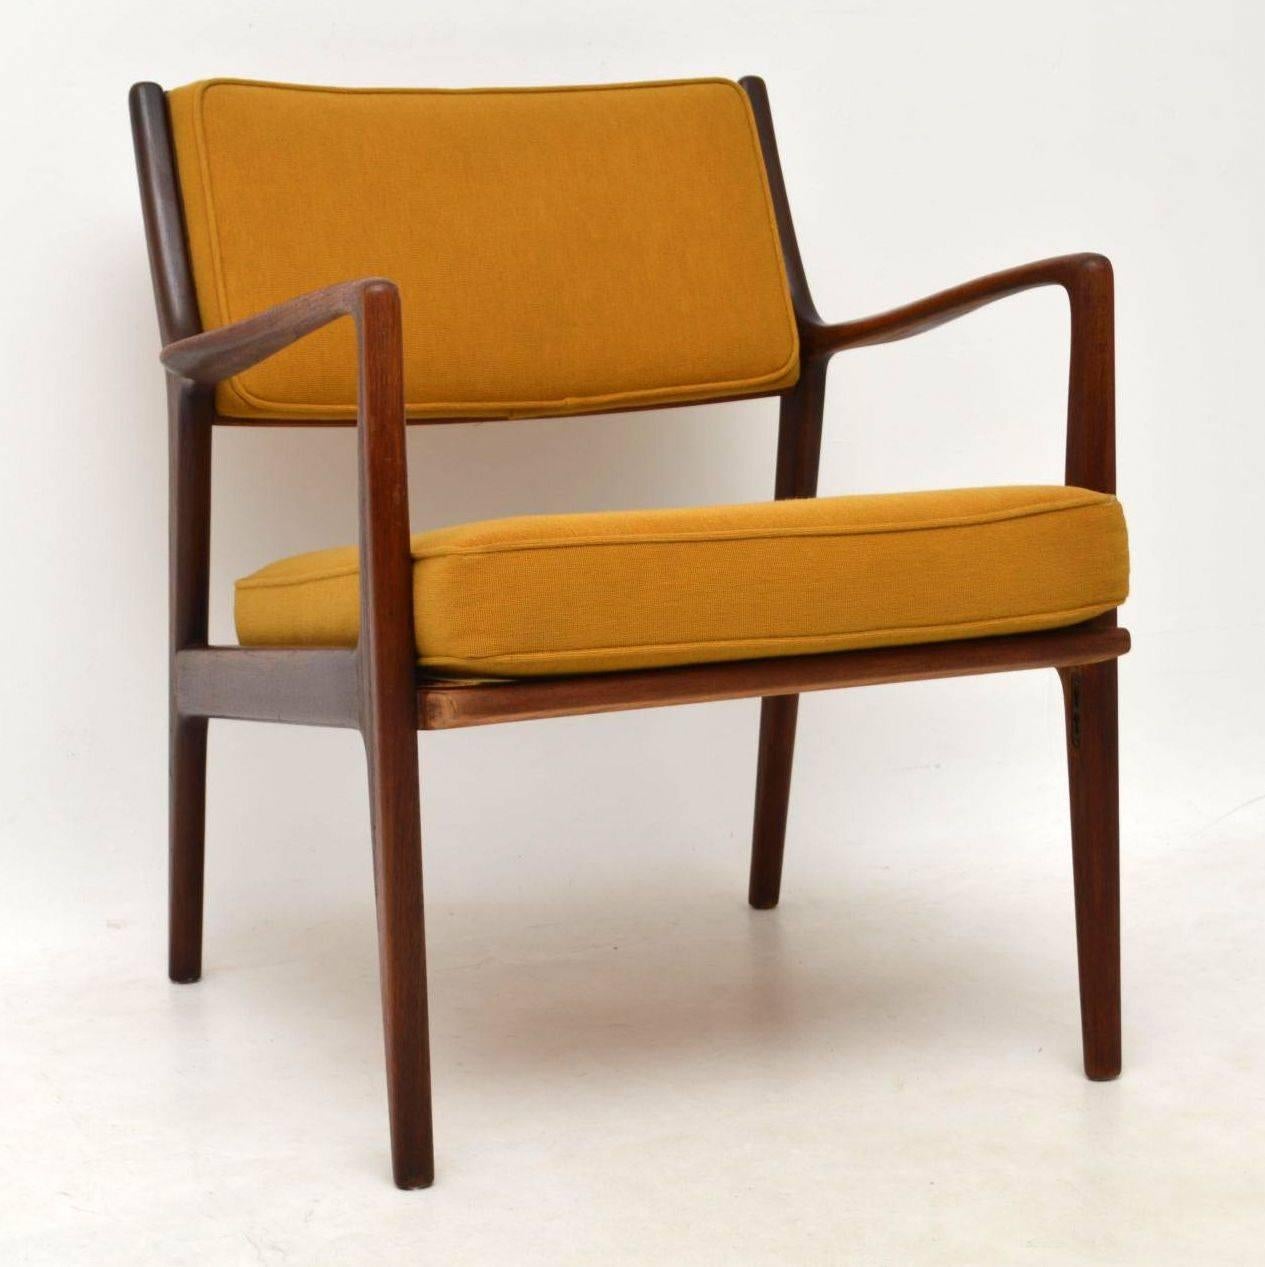 A beautifully designed vintage armchair in solid teak, this was designed by Karl-Erik Ekselius and was made by J.O Carlsson in Sweden. It dates from the 1960s, it’s in lovely vintage condition with just some minor surface wear to the polish. The